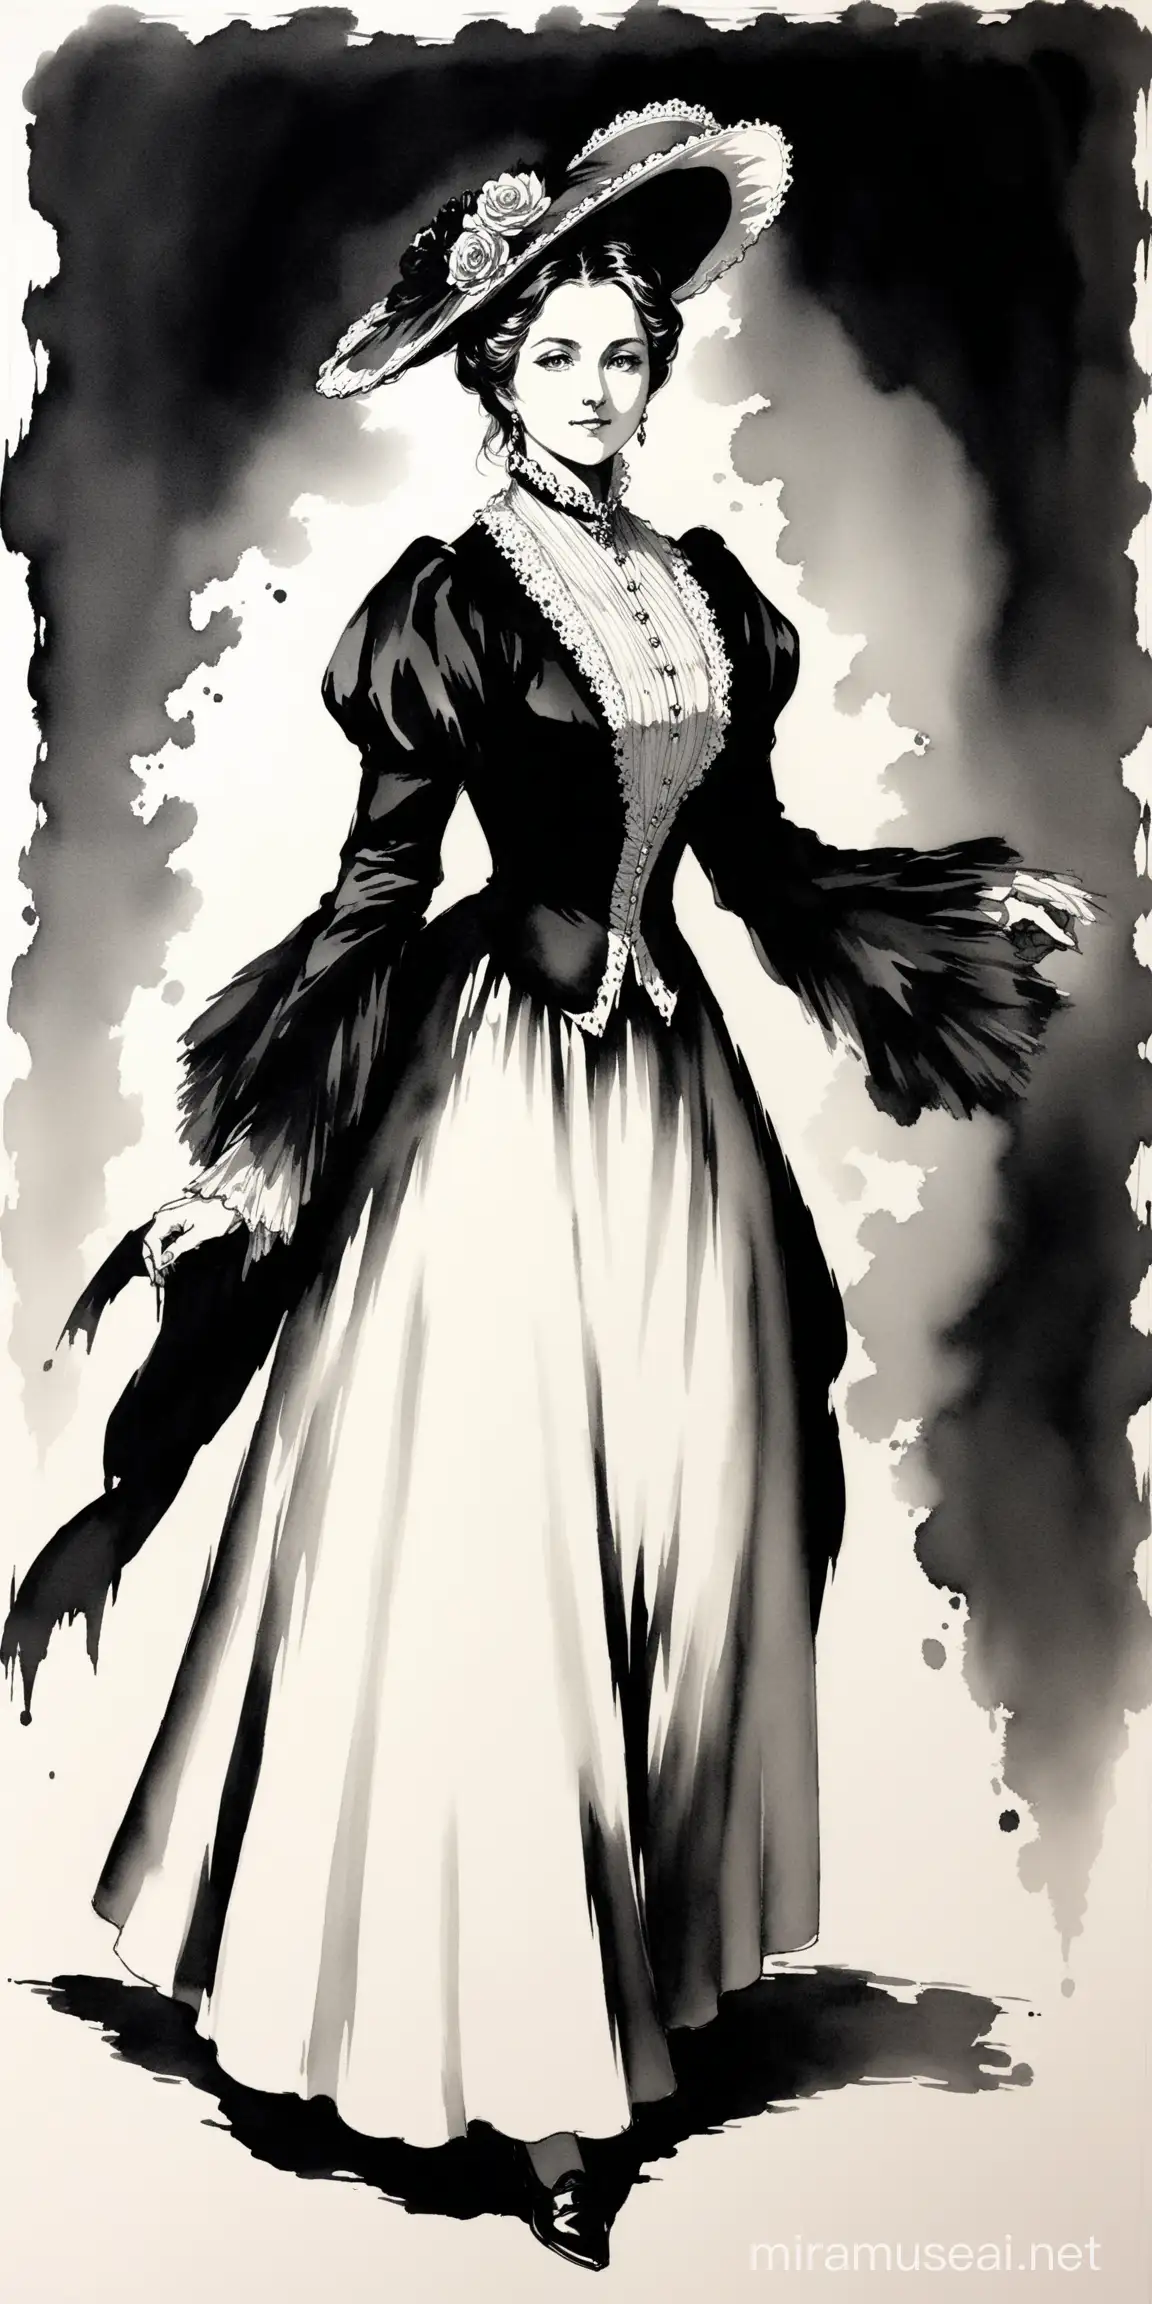 Mature noble woman, Victorian era, ink painting, black and white, more black, more shadows